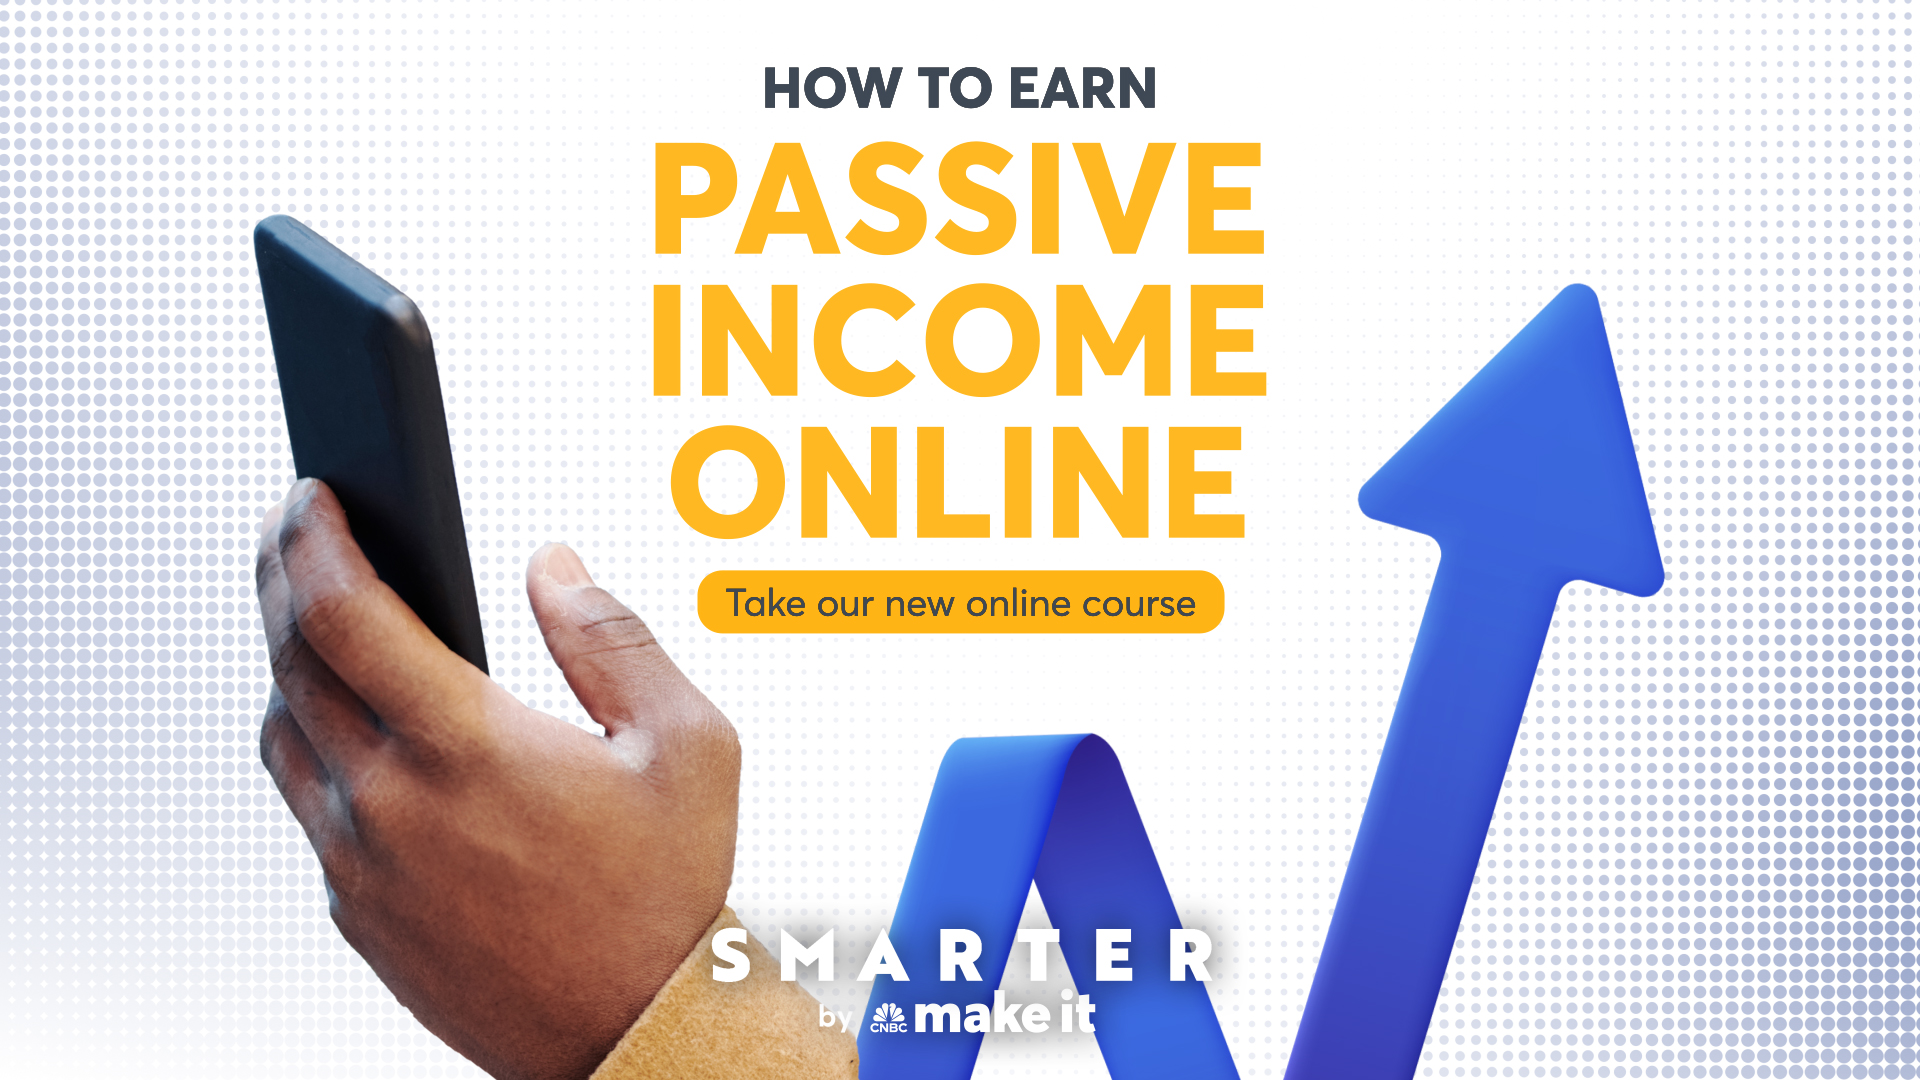 How to Earn Passive Income Online